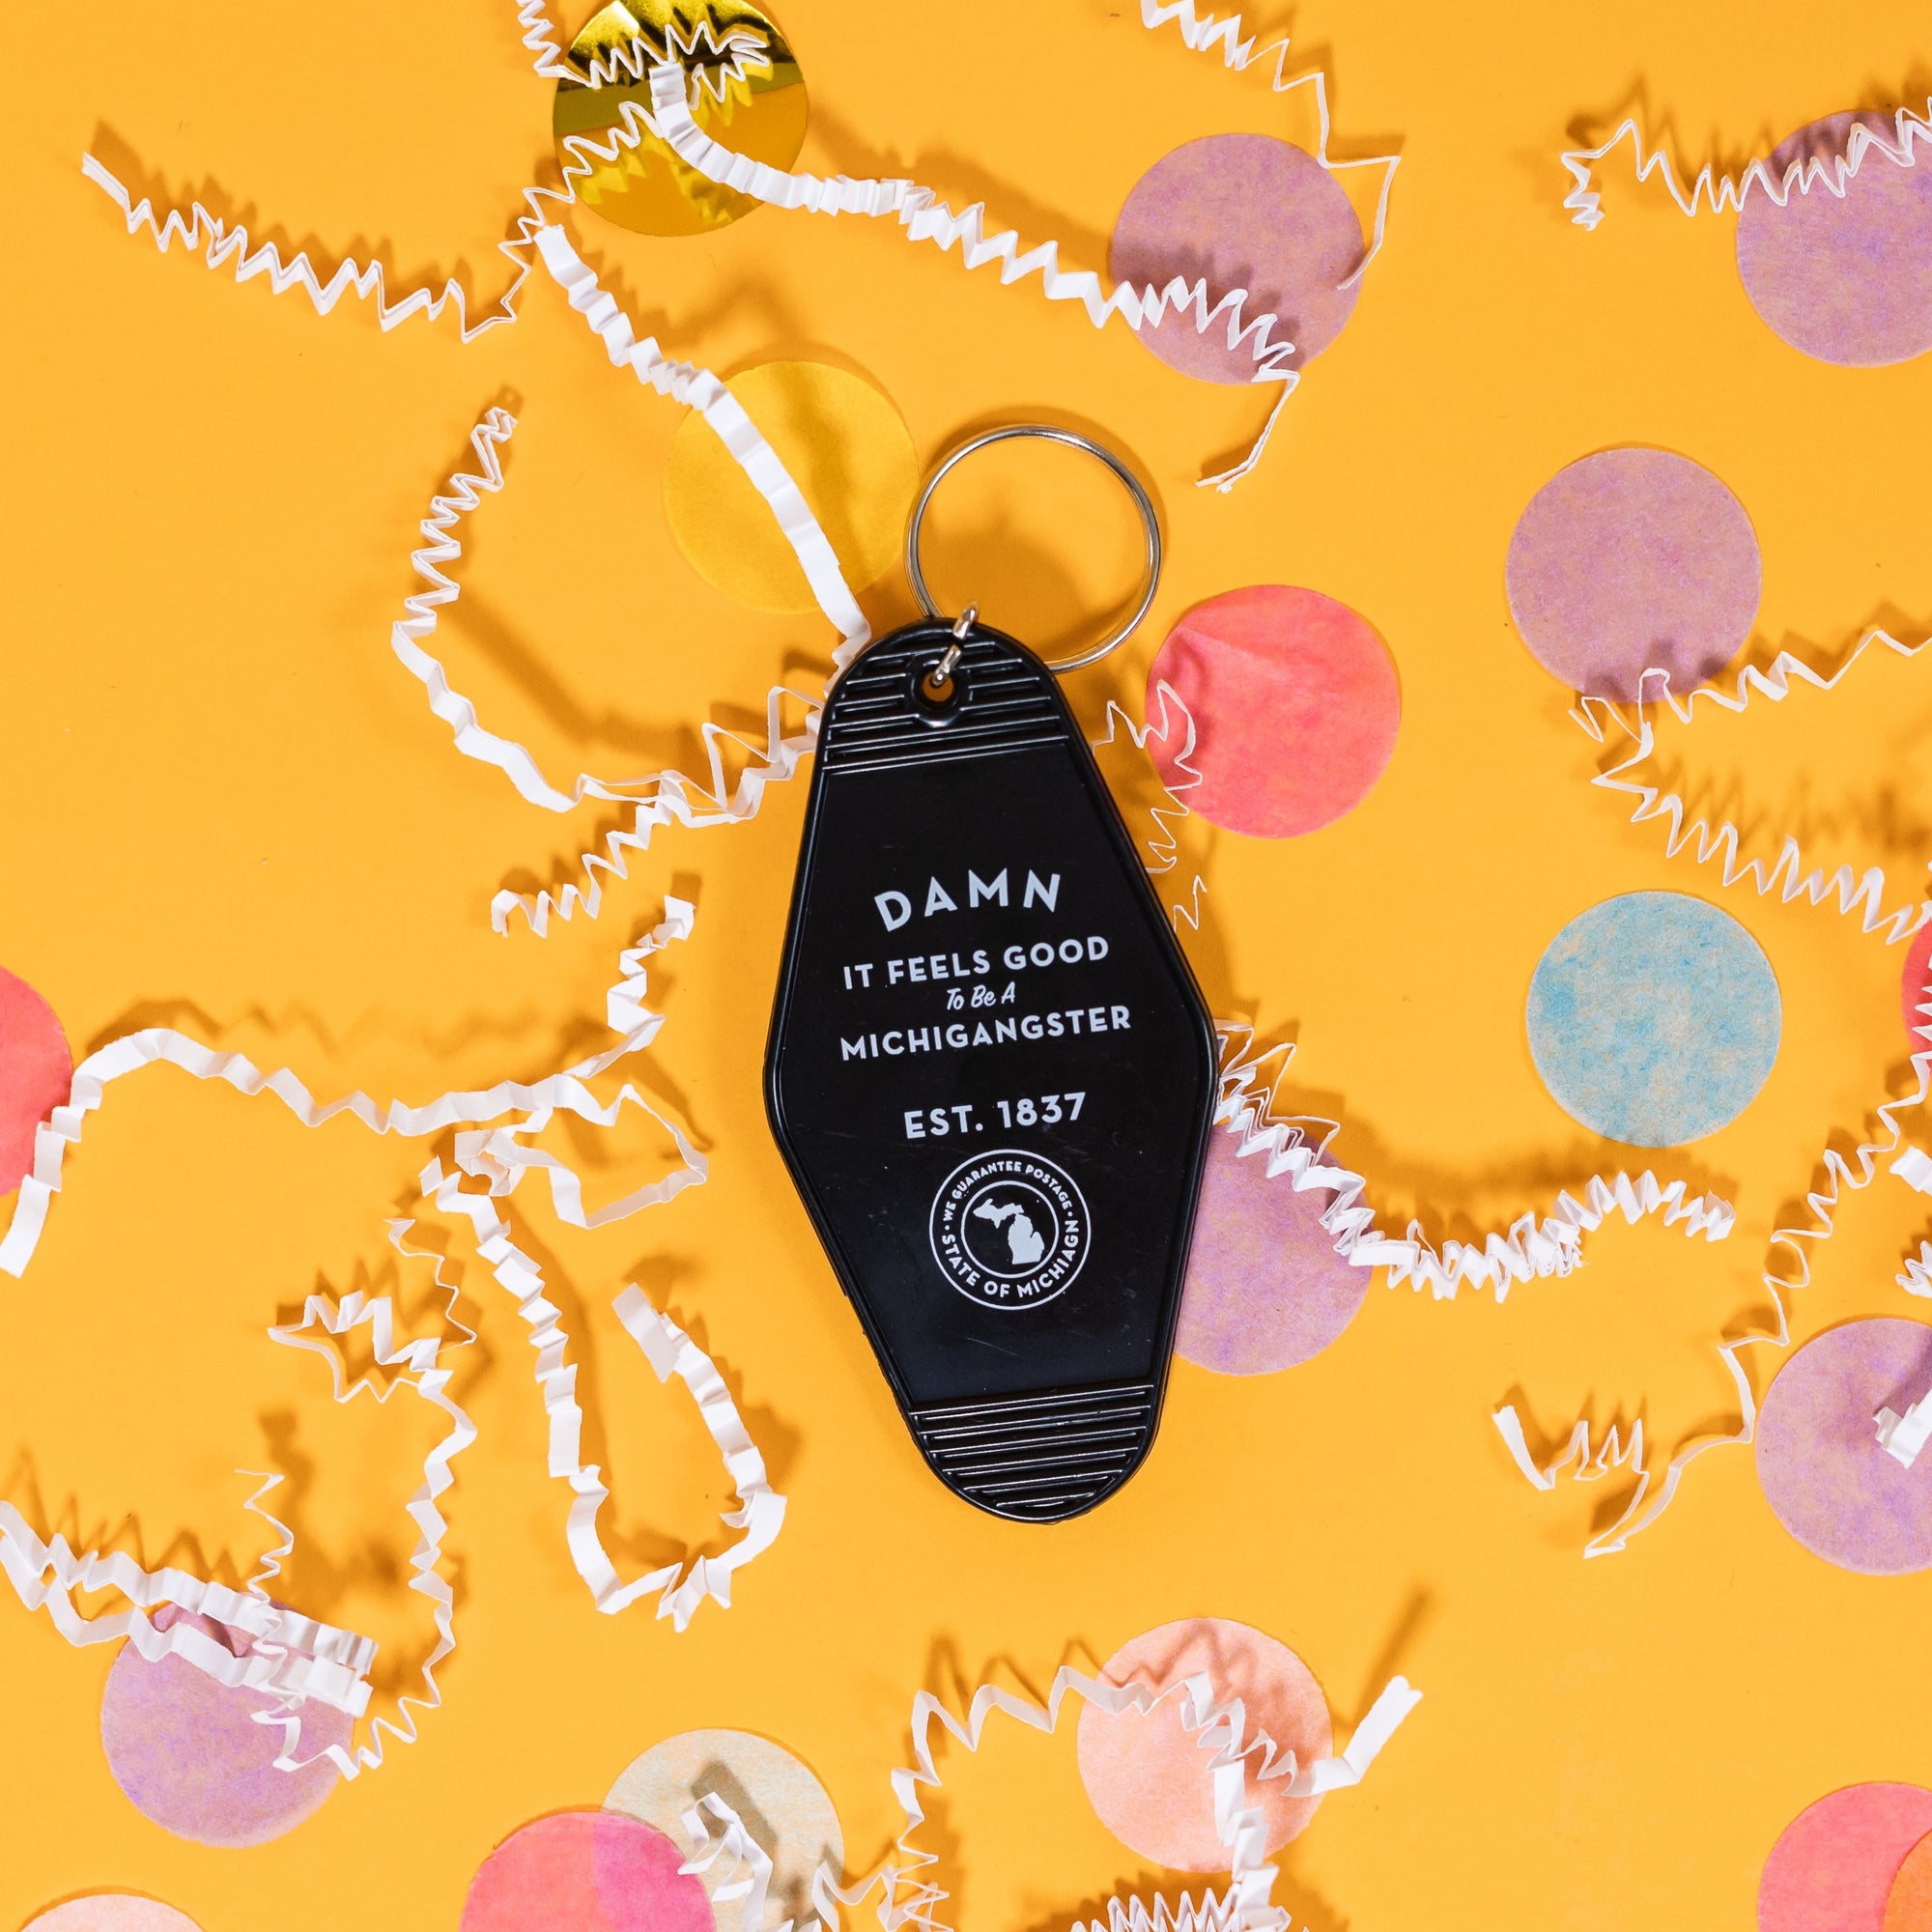 On a sunny mustard background sits a hotel key with white crinkle and big, colorful confetti scattered around. This black vintage hotel key ring says "Damn It Feels Good To Be A Michigangster EST. 1837" in white text. There is a design that includes an icon of Michigan's lower and upper peninsulas enclosed in a cirle that reads "State of Michigan" in white.